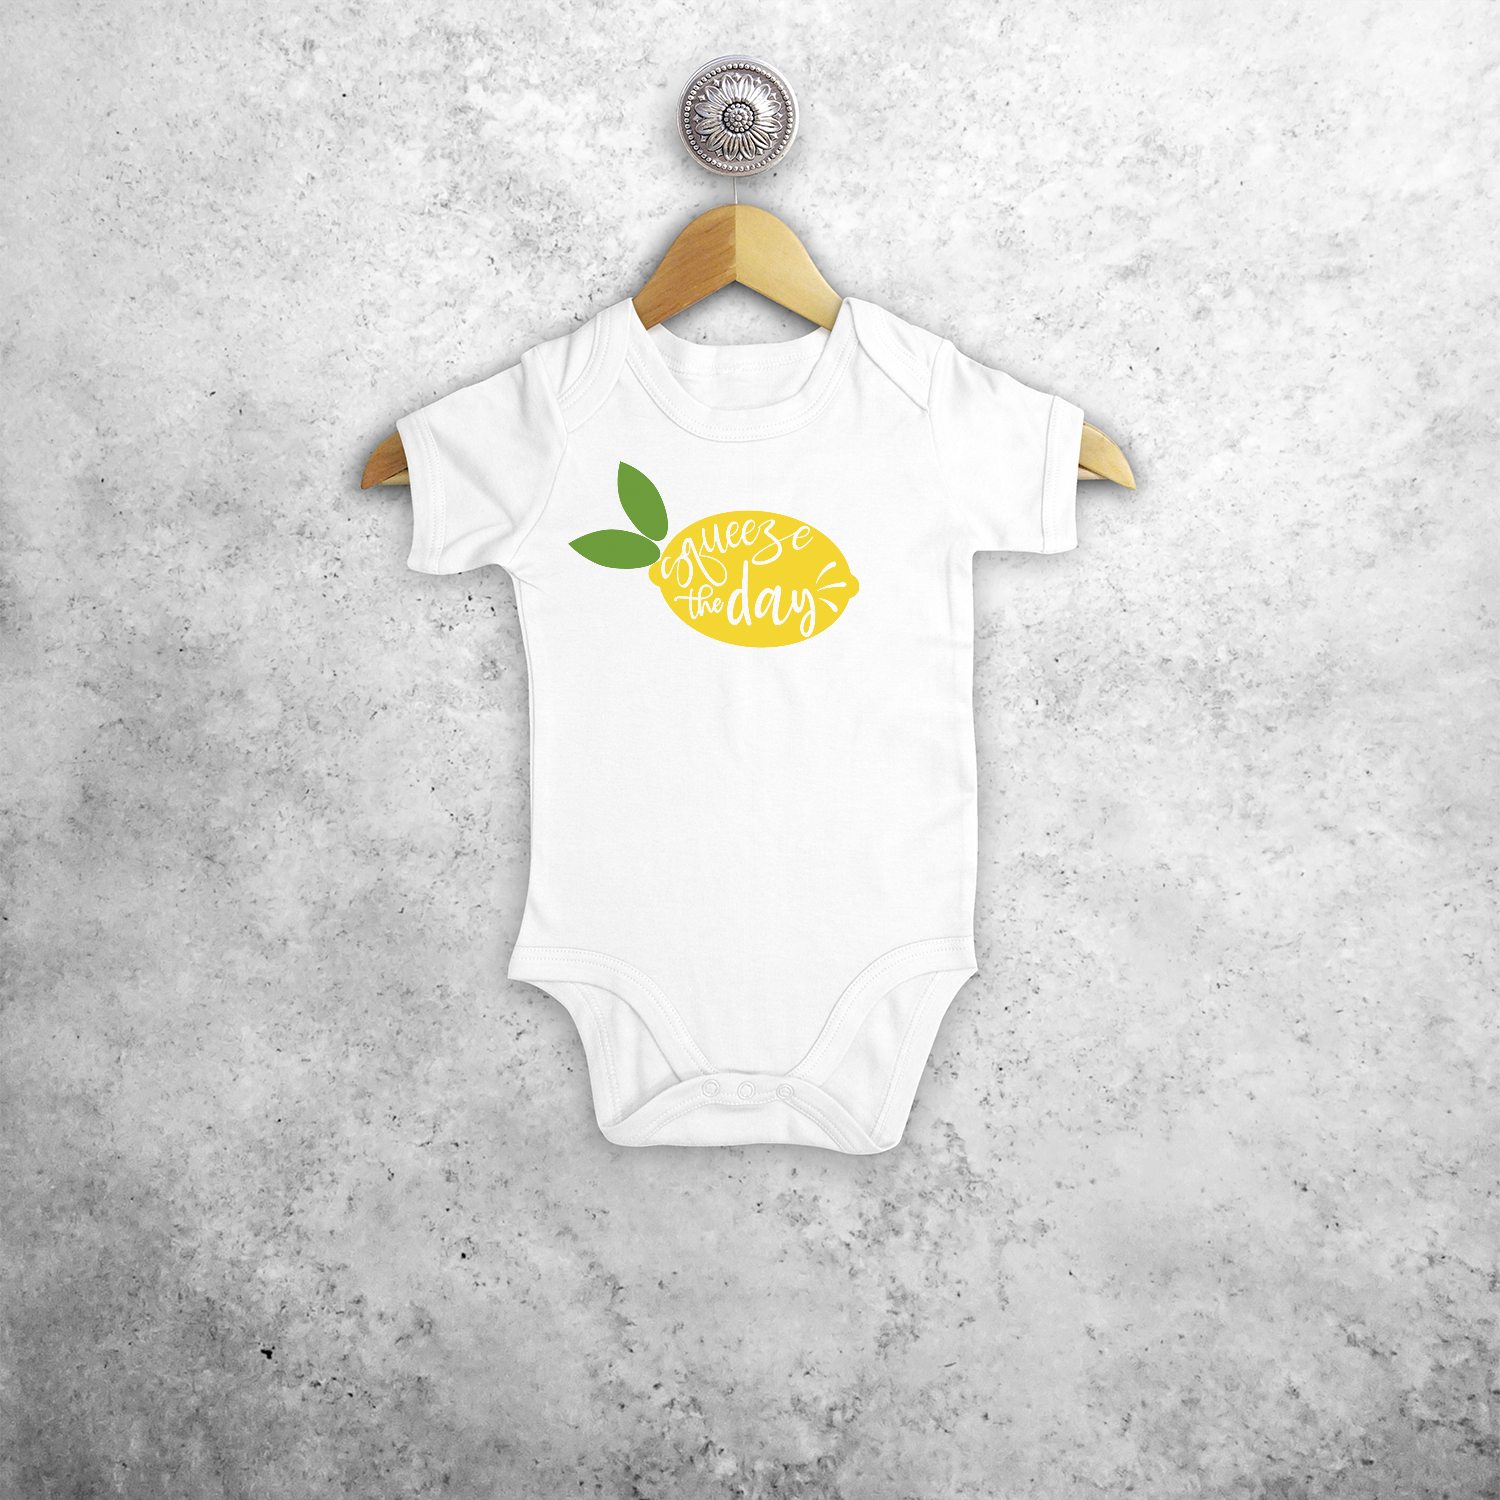 'Squeeze the day' baby shortsleeve bodysuit